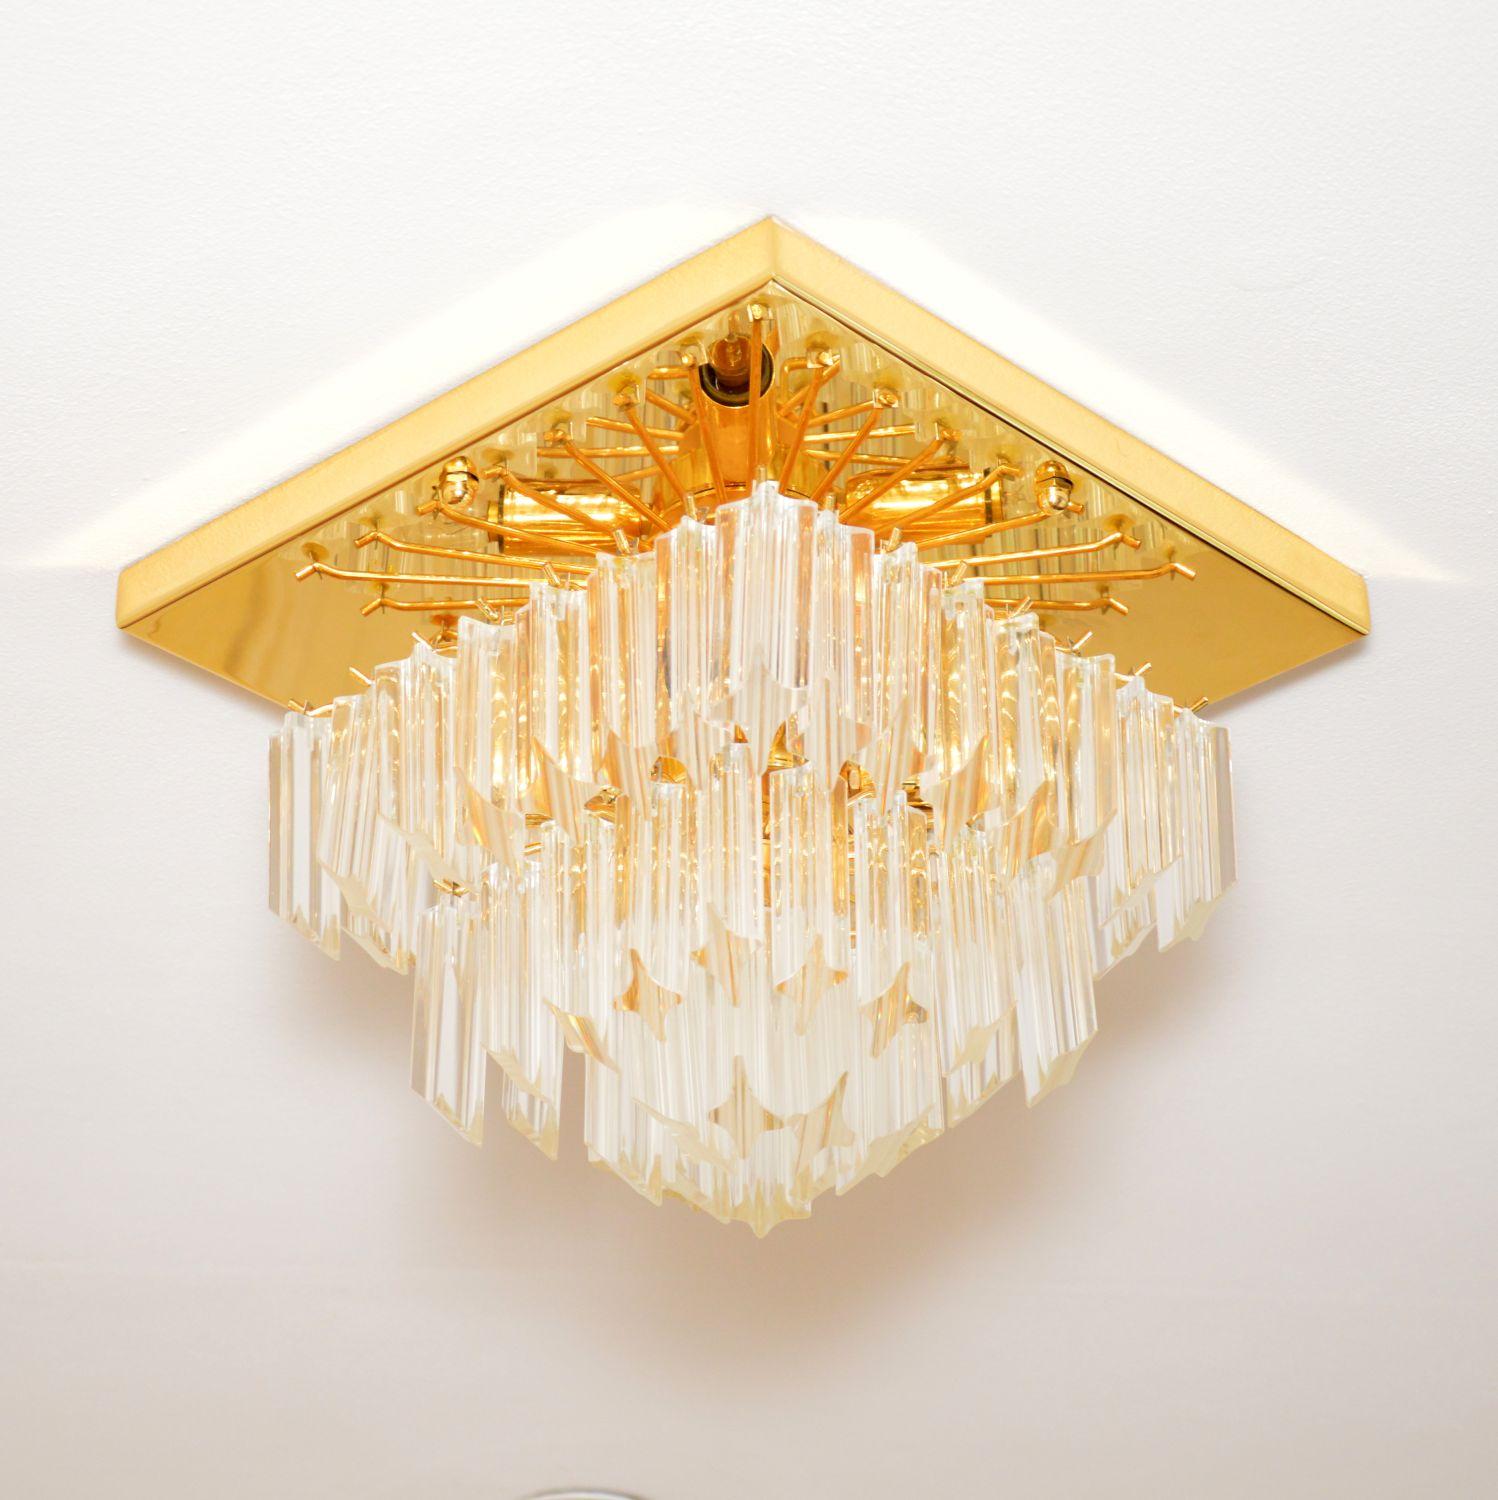 A stunning original Murano glass and brass ceiling light by Paulo Venini. This was made in Italy, it dates from the 1970-1980s.

The quality is outstanding and this has a beautiful design. The hand cut Murano glass drops are suspended from a solid